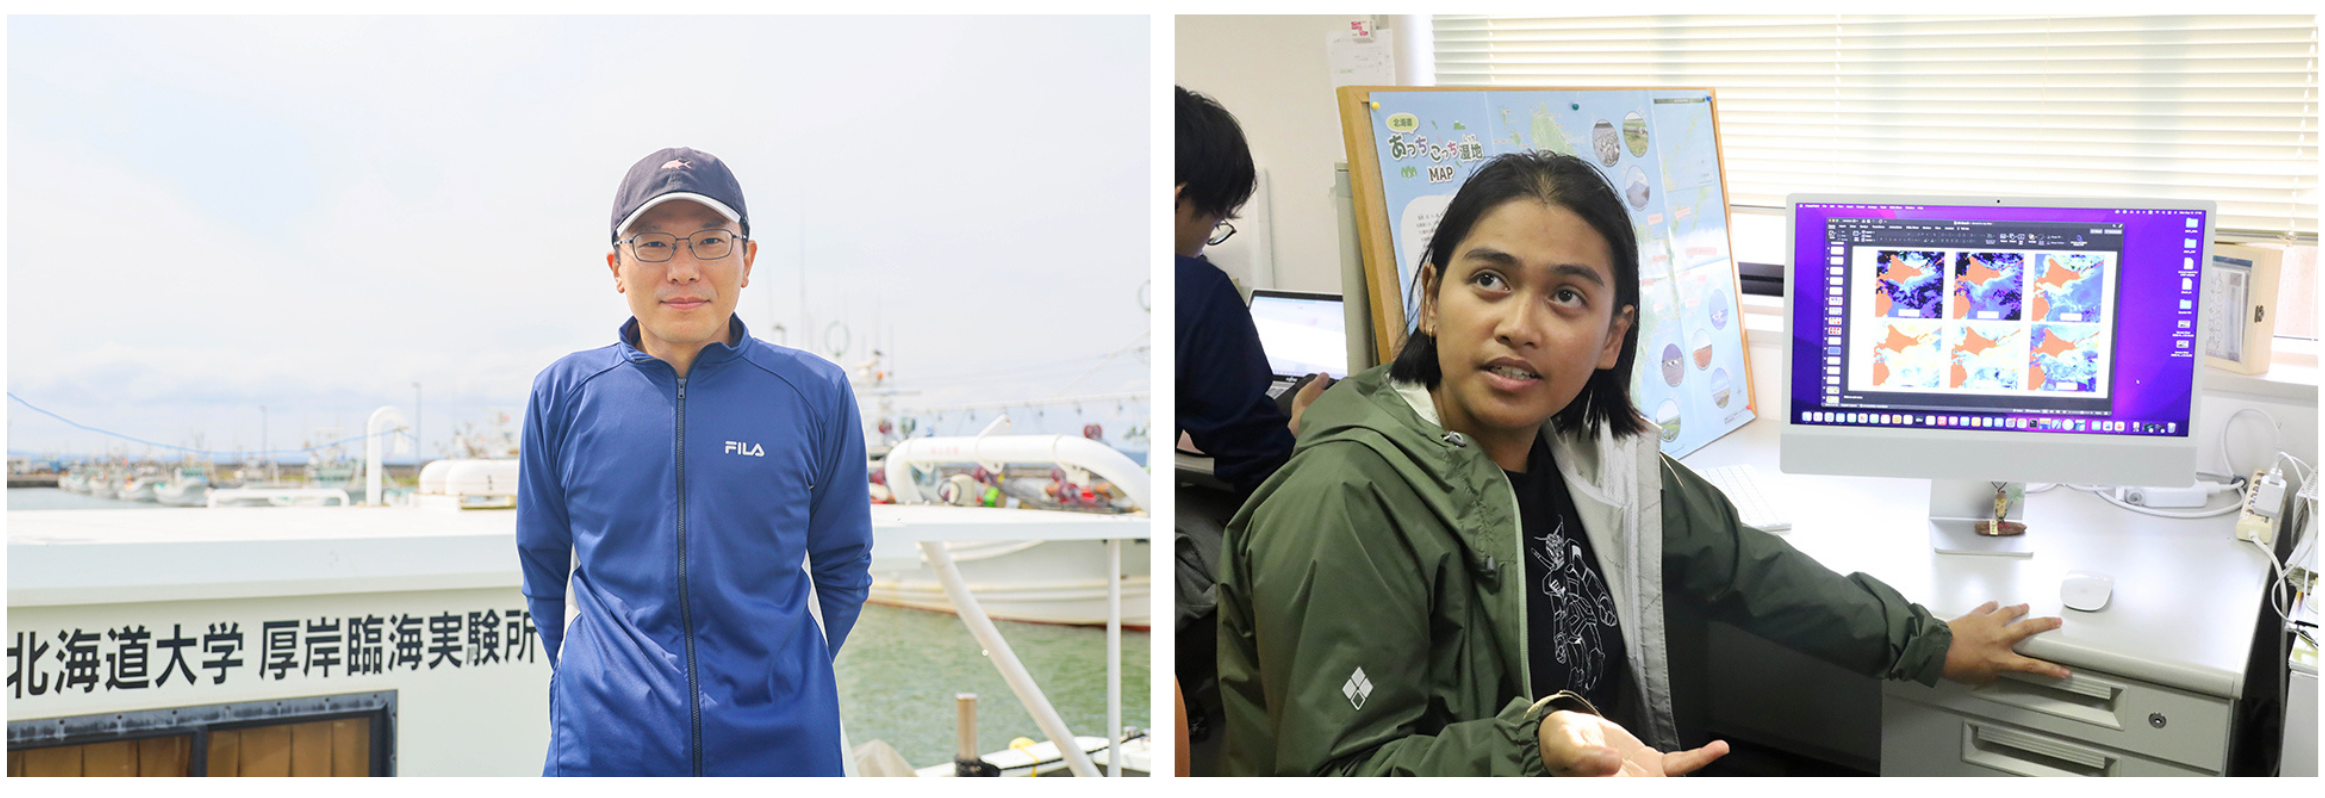 Left: Assoc. Prof. Tomonori Isada standing in front of Misago-maru. Right: Willy Angraini sitting on her work desk.